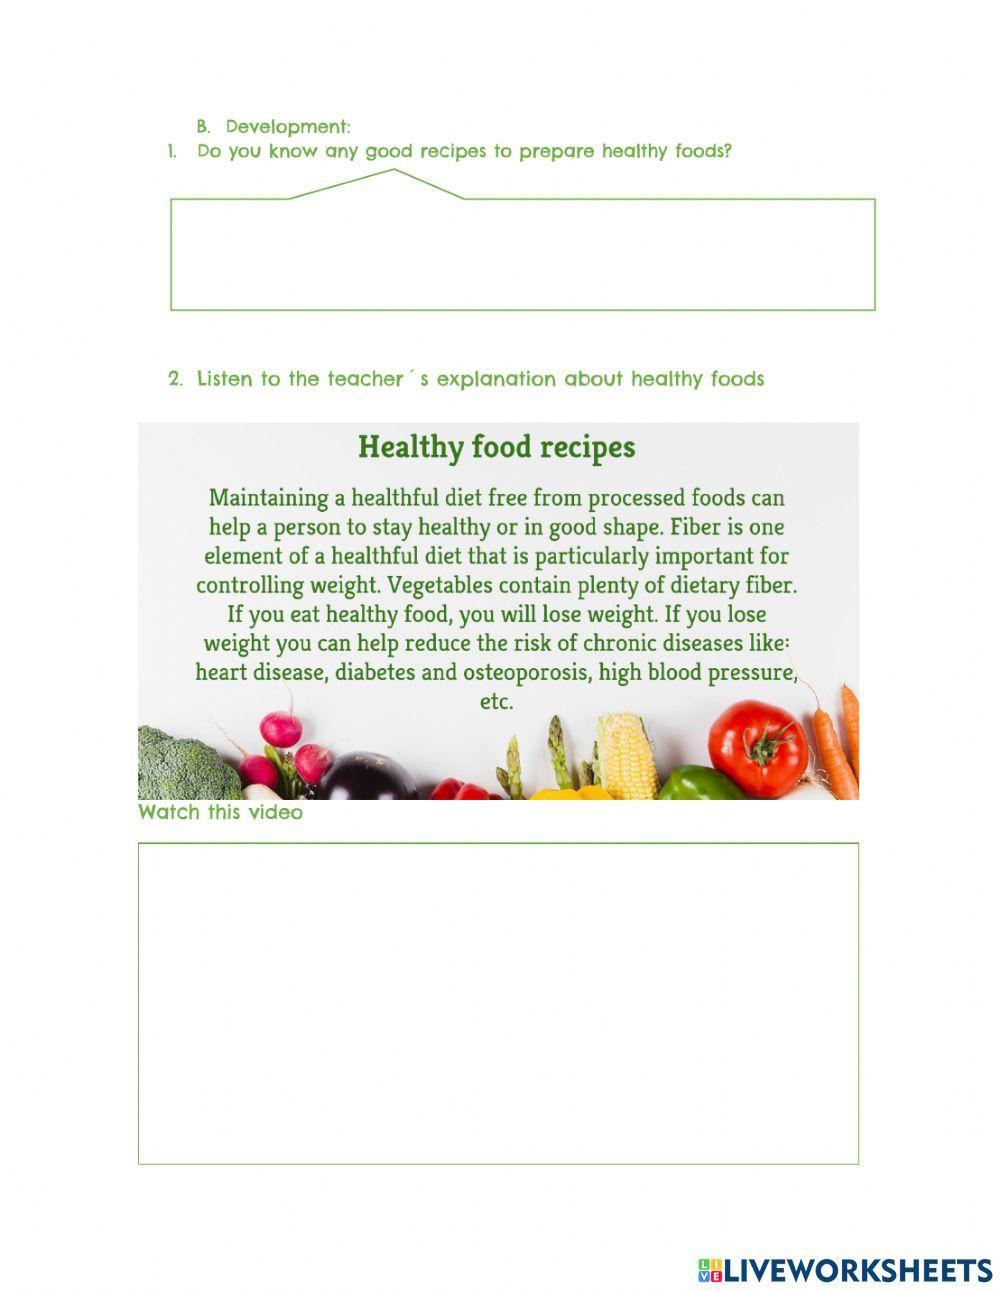 Recipes for Healthy Food